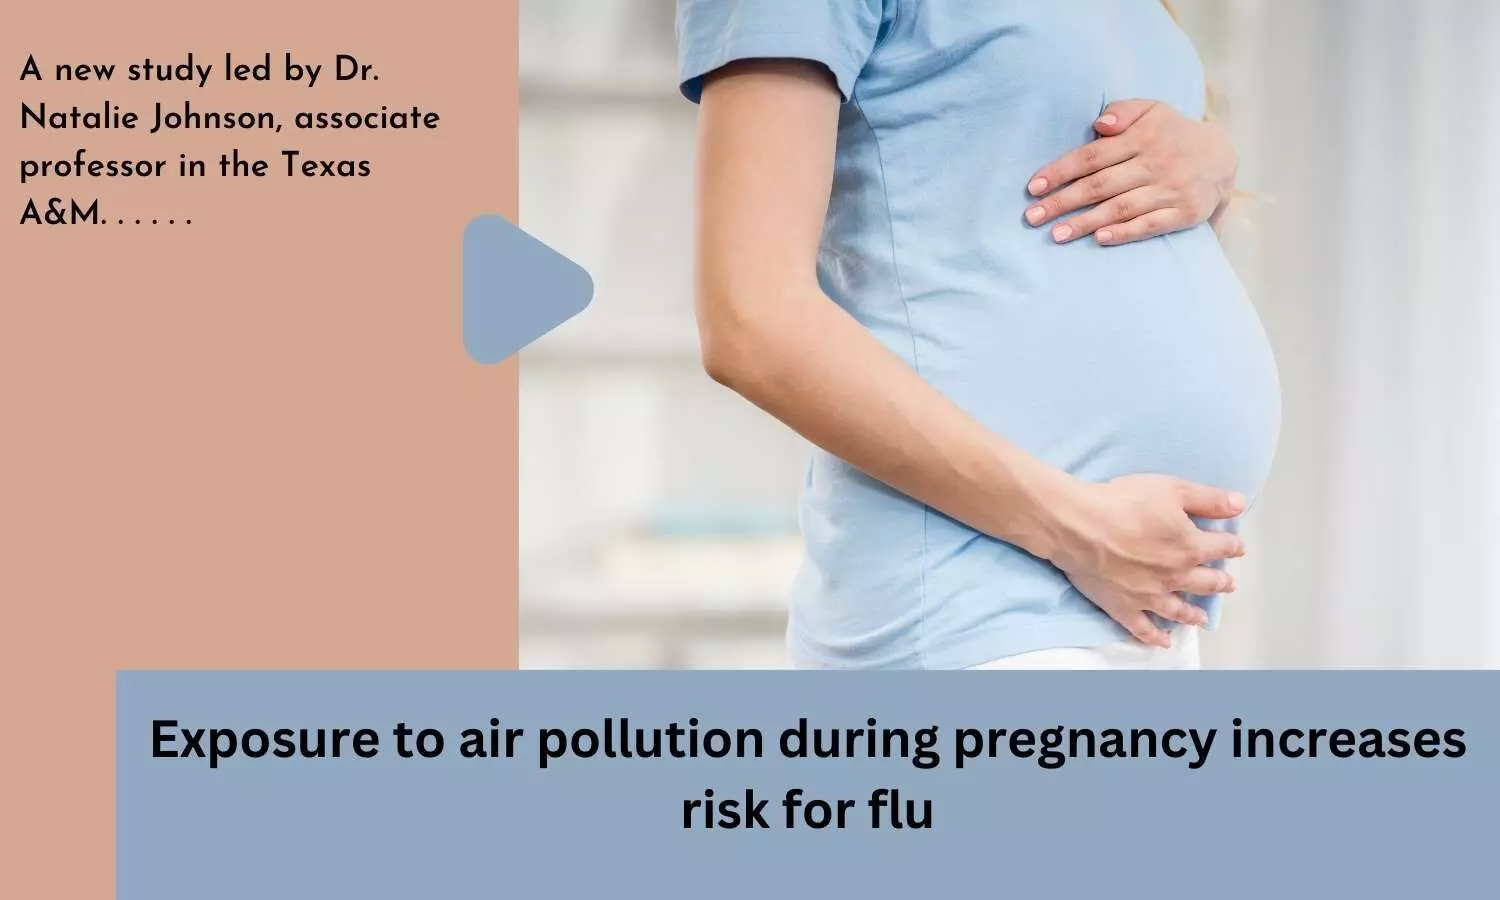 Exposure to air pollution during pregnancy increases risk for flu